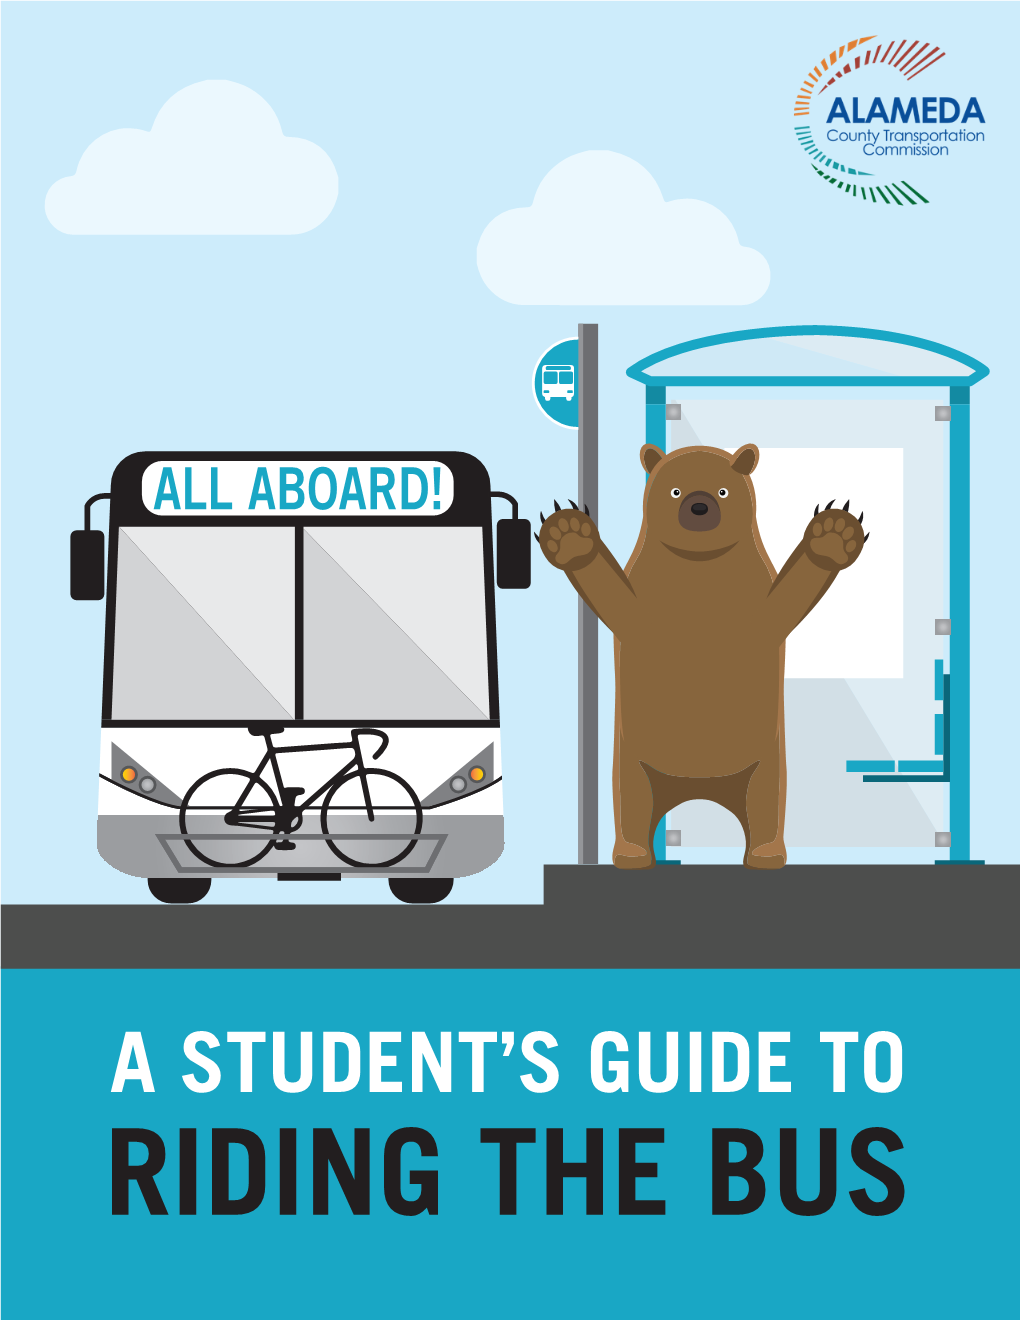 RIDING the BUS Hi, I’M Monarch the Bear — Follow Me As I Share Some Helpful Tips on How to Ride the Bus